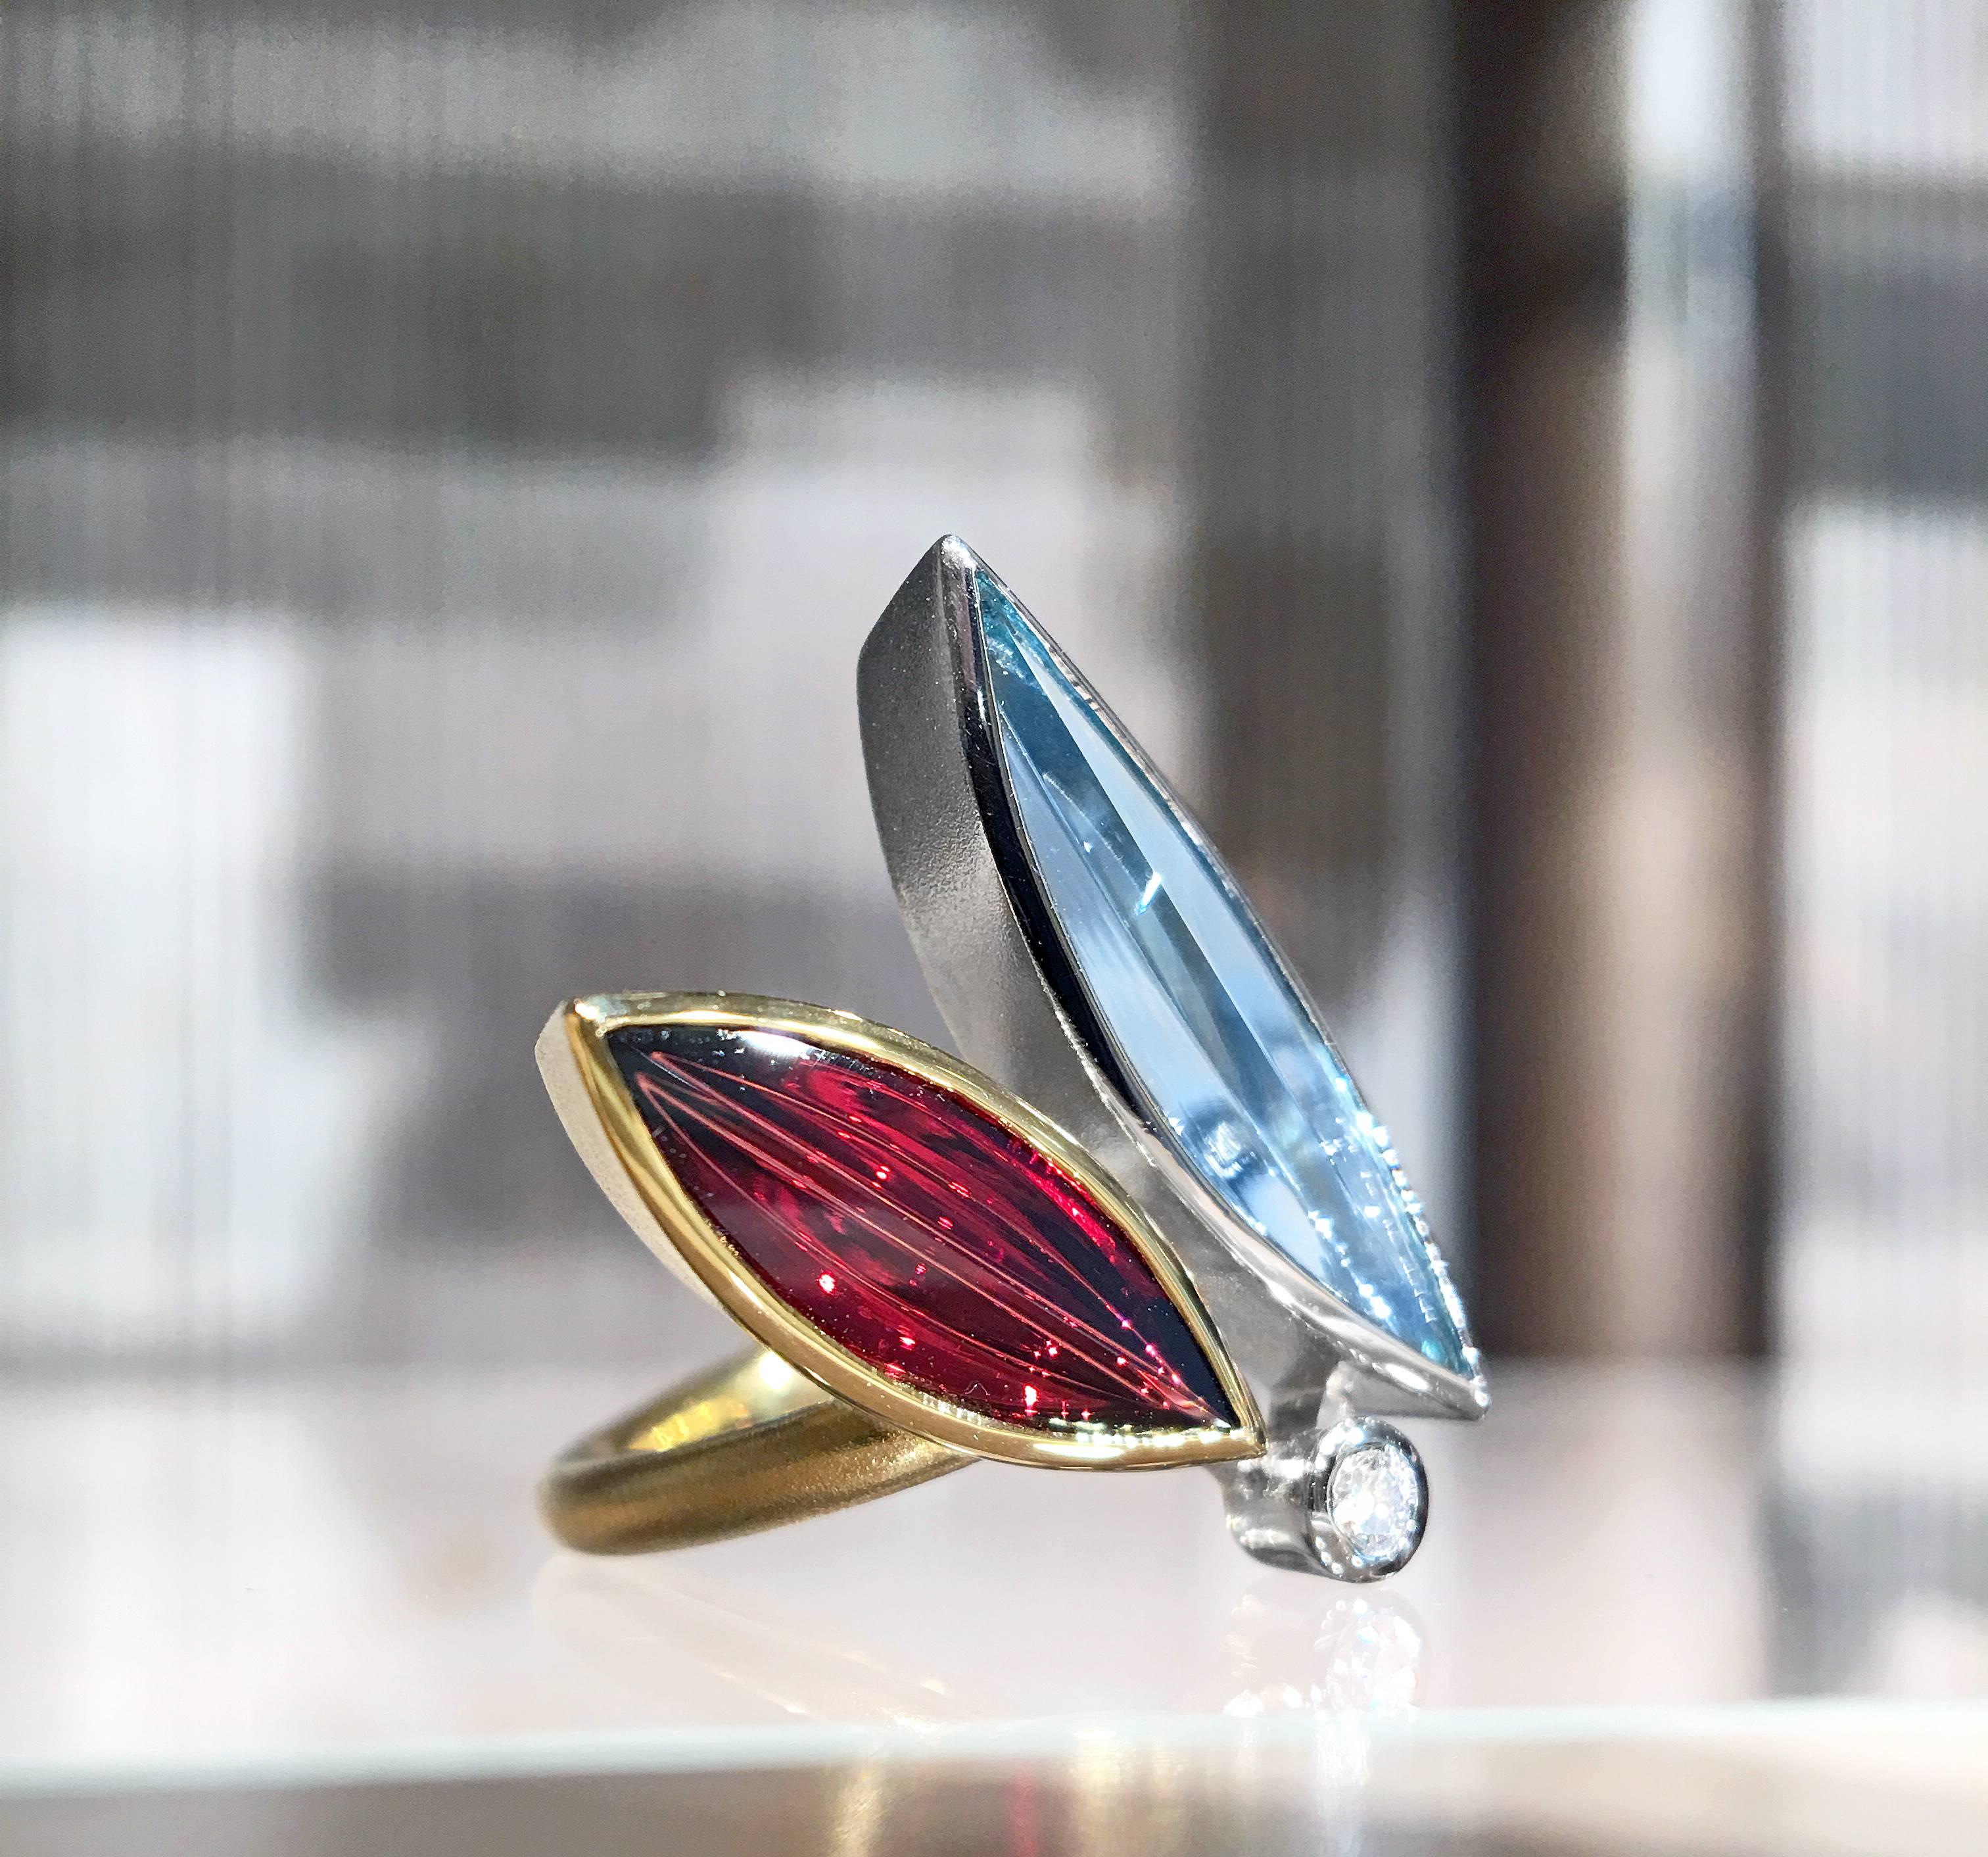 One of a Kind Erotik Ring by the internationally-acclaimed "Picasso of Gem Cuts", German master metalsmith and gem-cutter Atelier Munsteiner, handcrafted in a combination of matte and high-polished 18k yellow gold and platinum featuring a